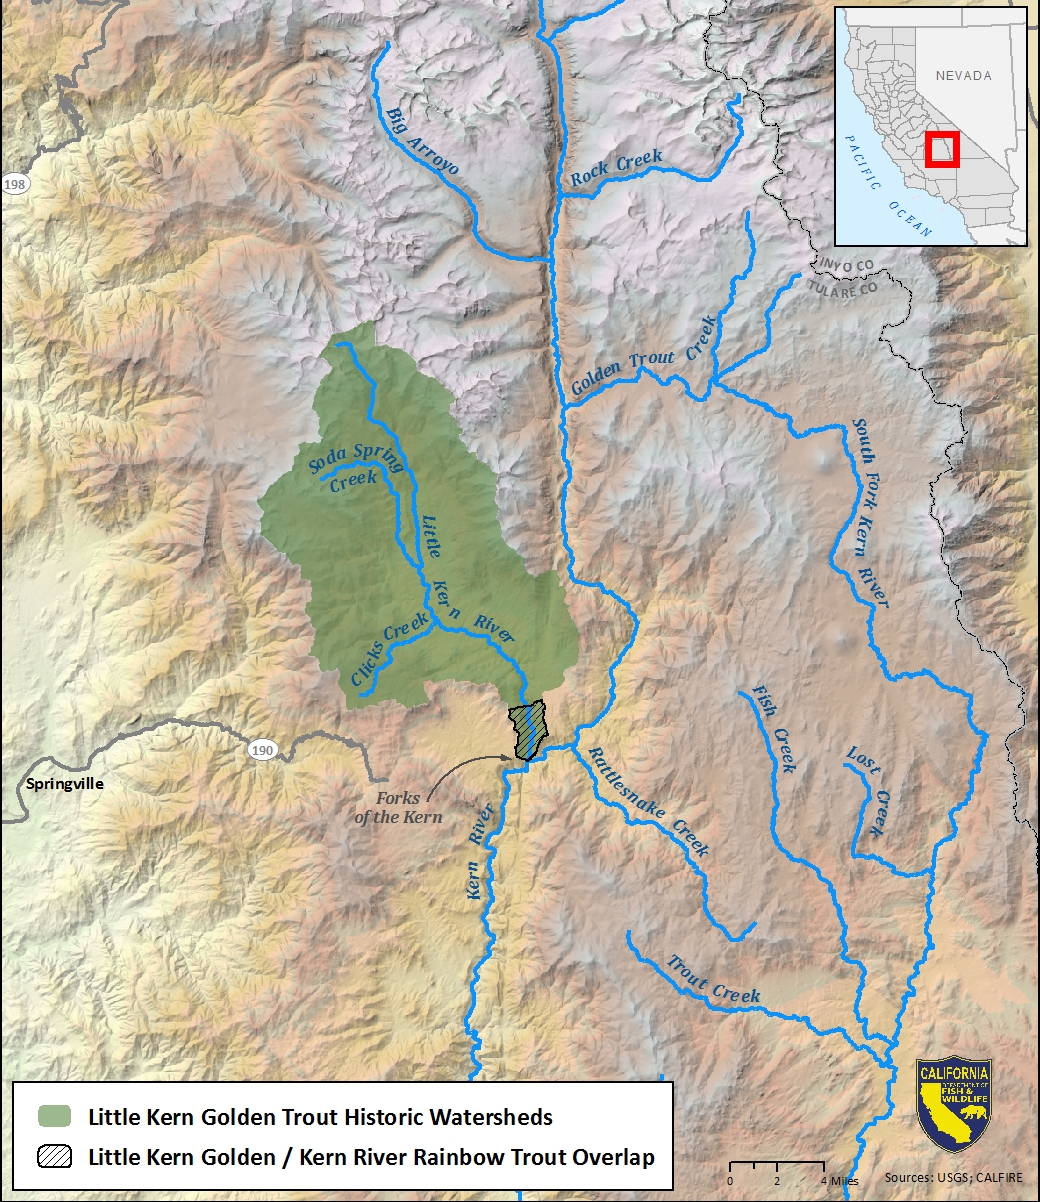 Map of Little Kern golden trout historic watersheds-link opens in new window